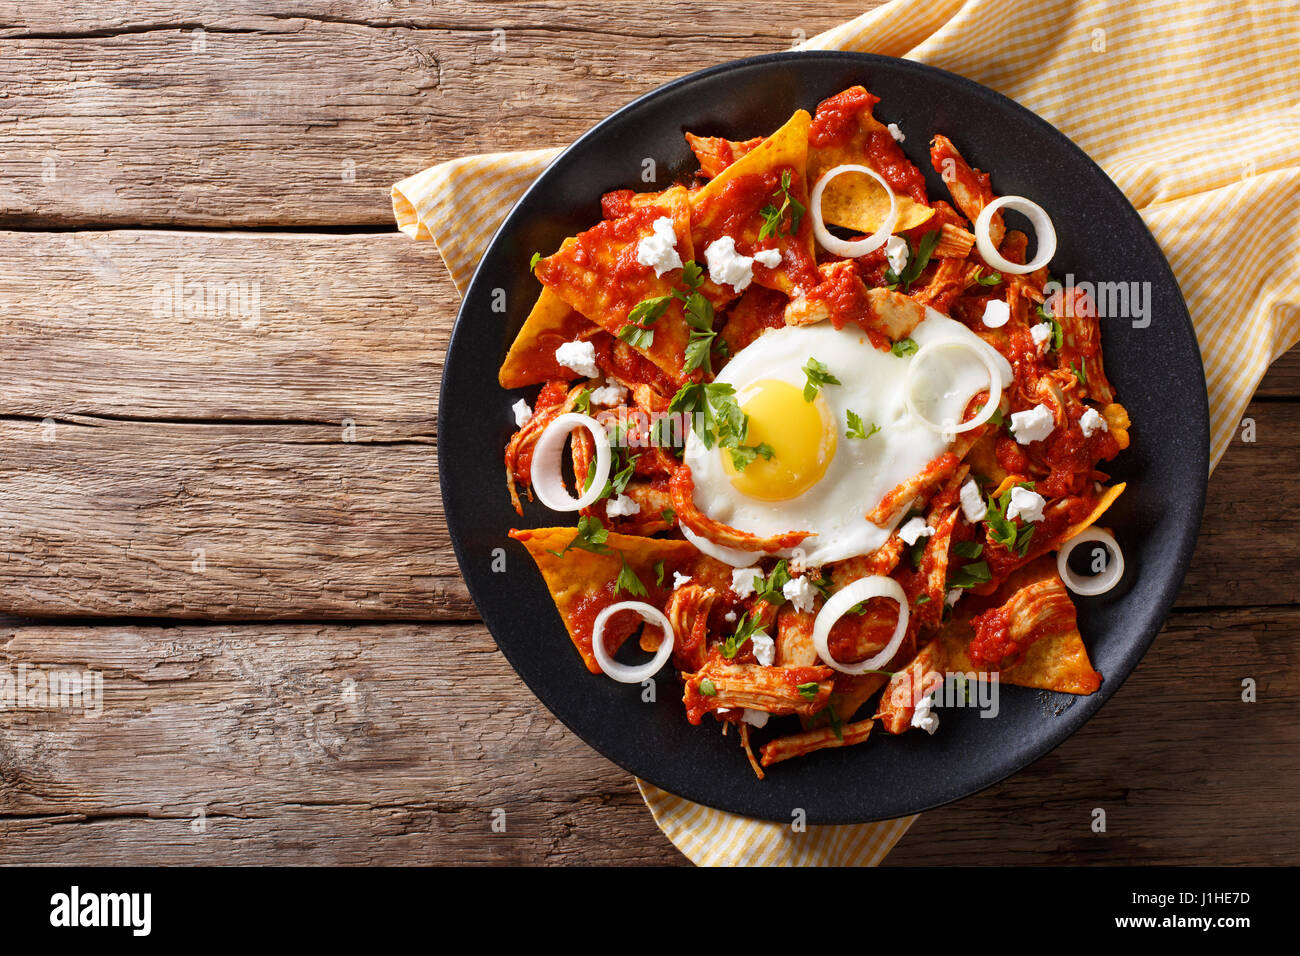 Mexican nachos with tomato salsa, chicken and egg close-up on a plate. Horizontal view from above Stock Photo